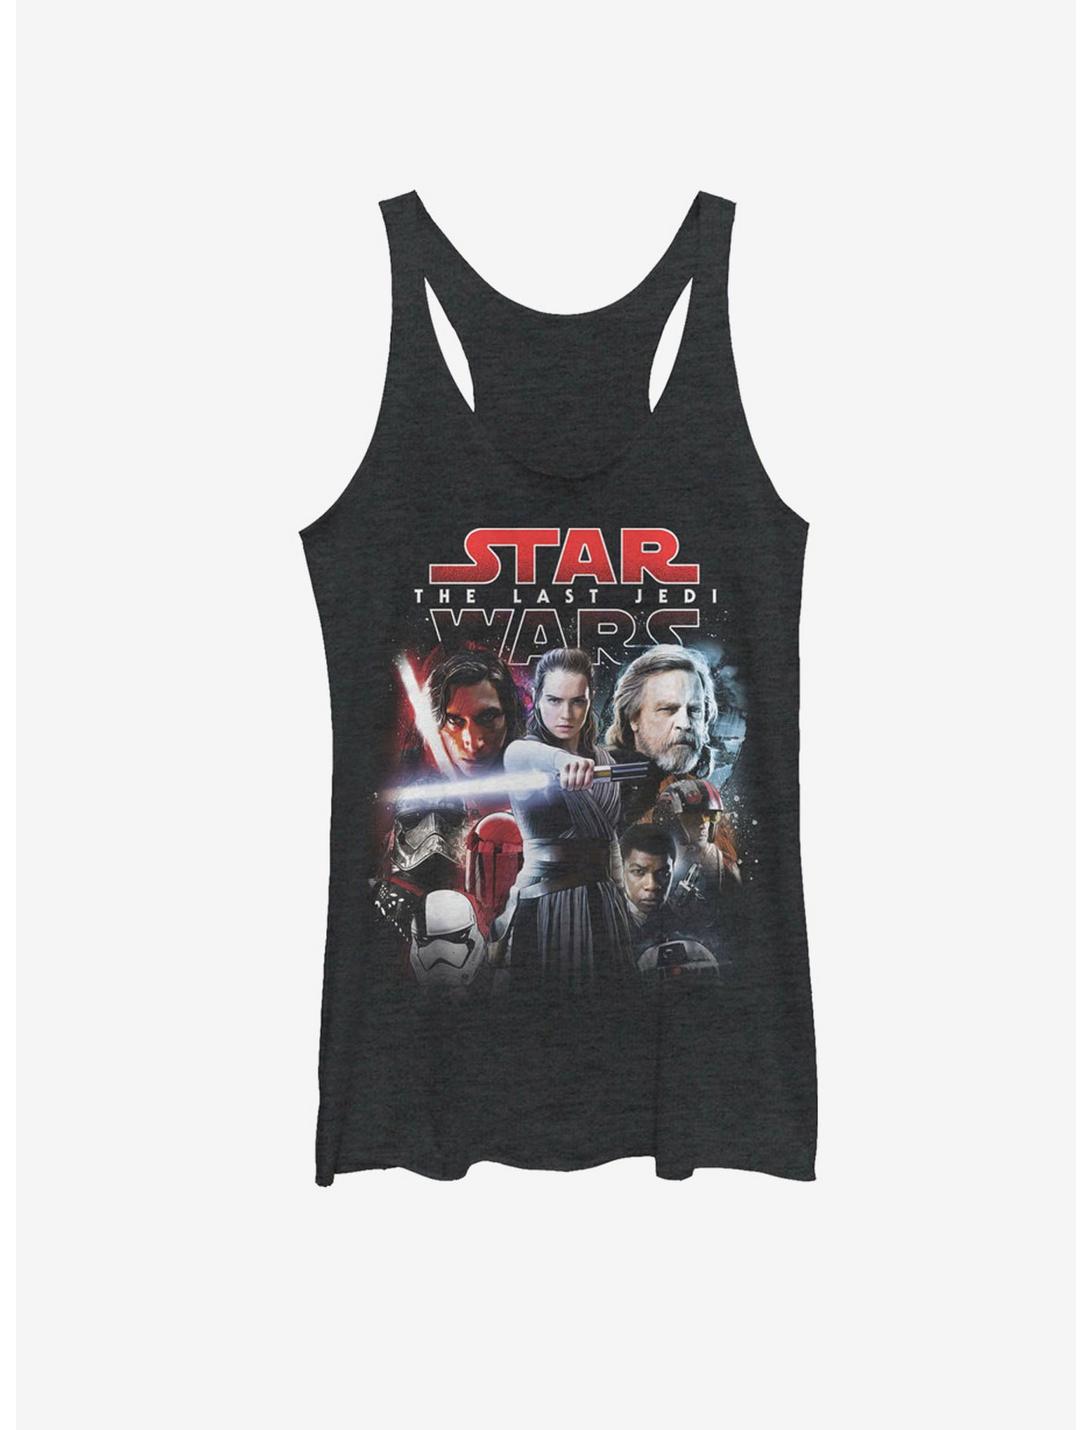 Star Wars: The Last Jedi Movie Poster Style Womens Tank Top, BLK HTR, hi-res